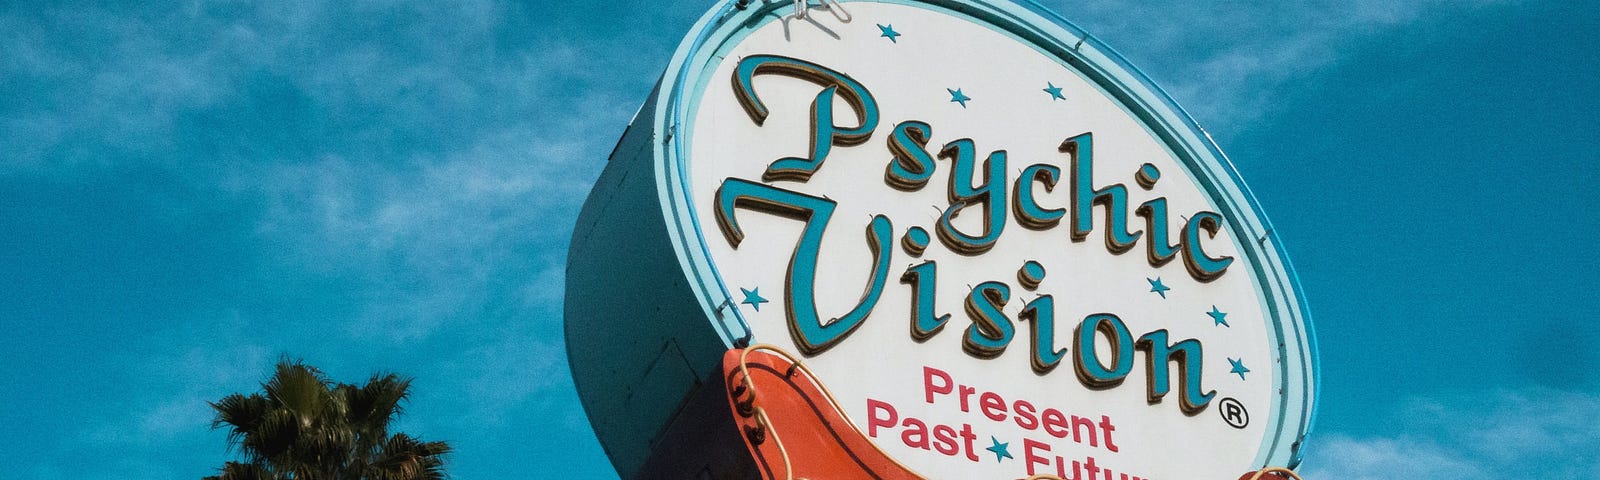 Psychic Vision advertising sign